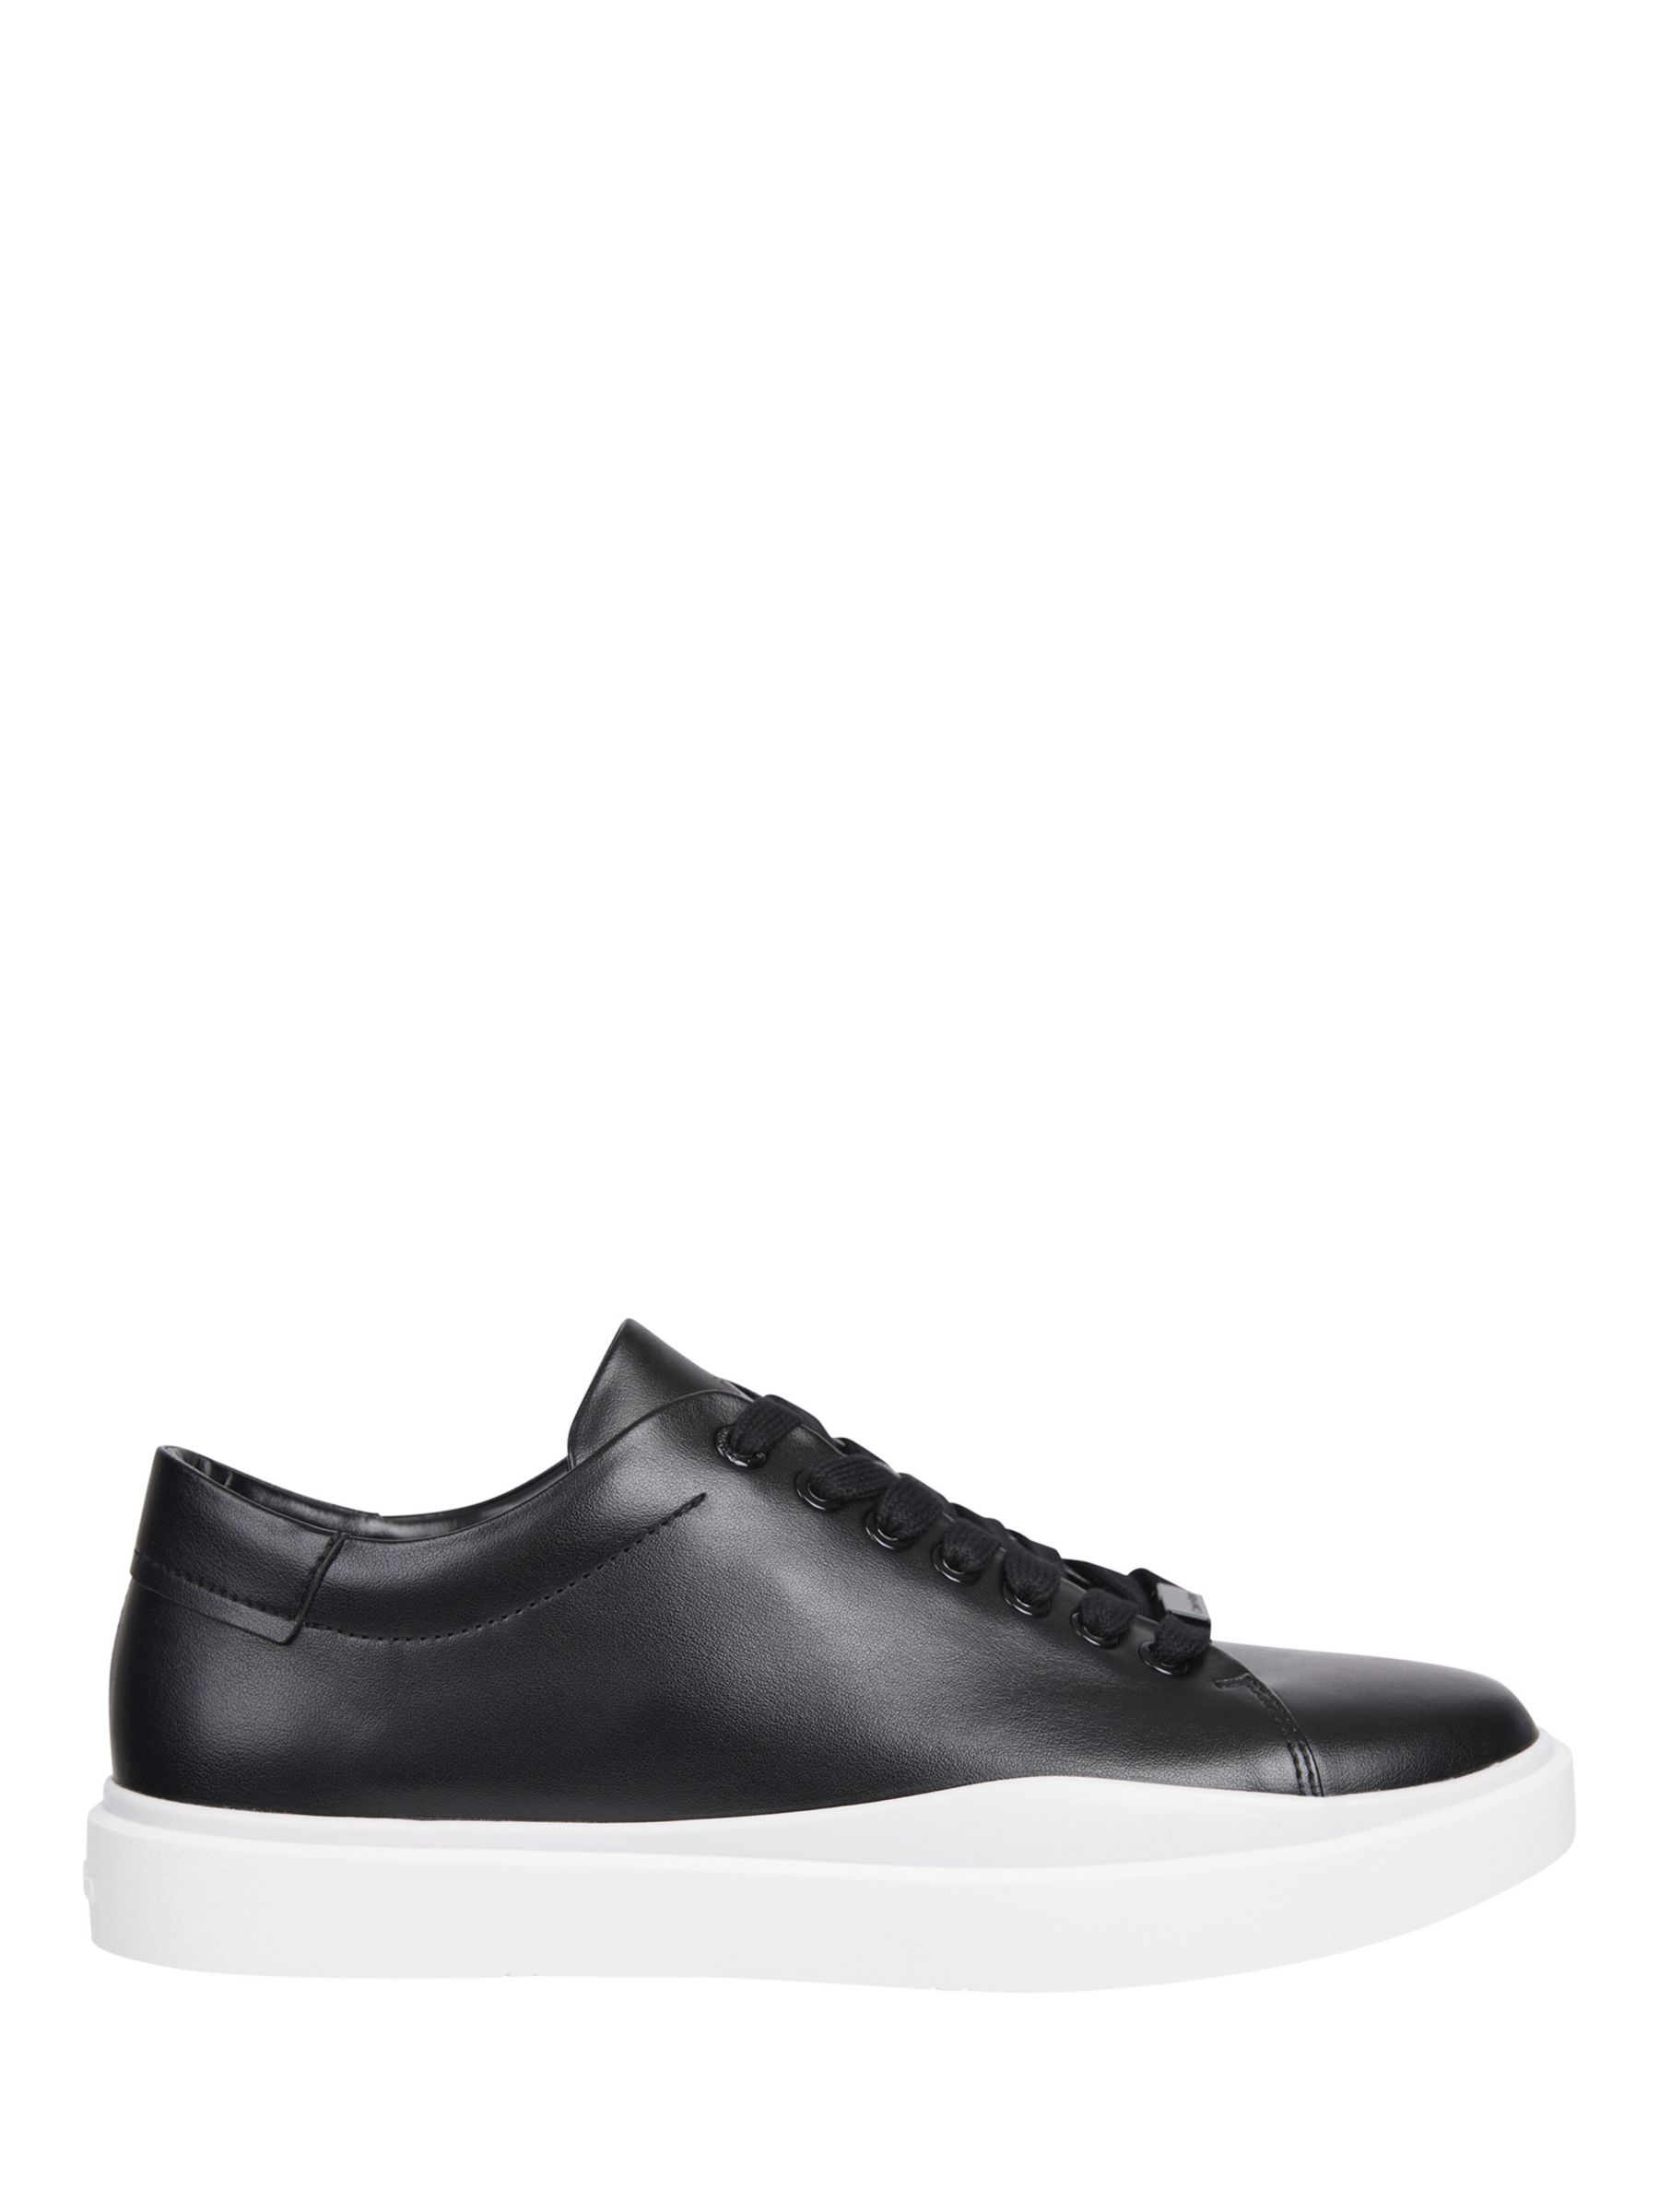 Calvin Klein Lace Up Low Top Trainers, CK Black at John Lewis & Partners